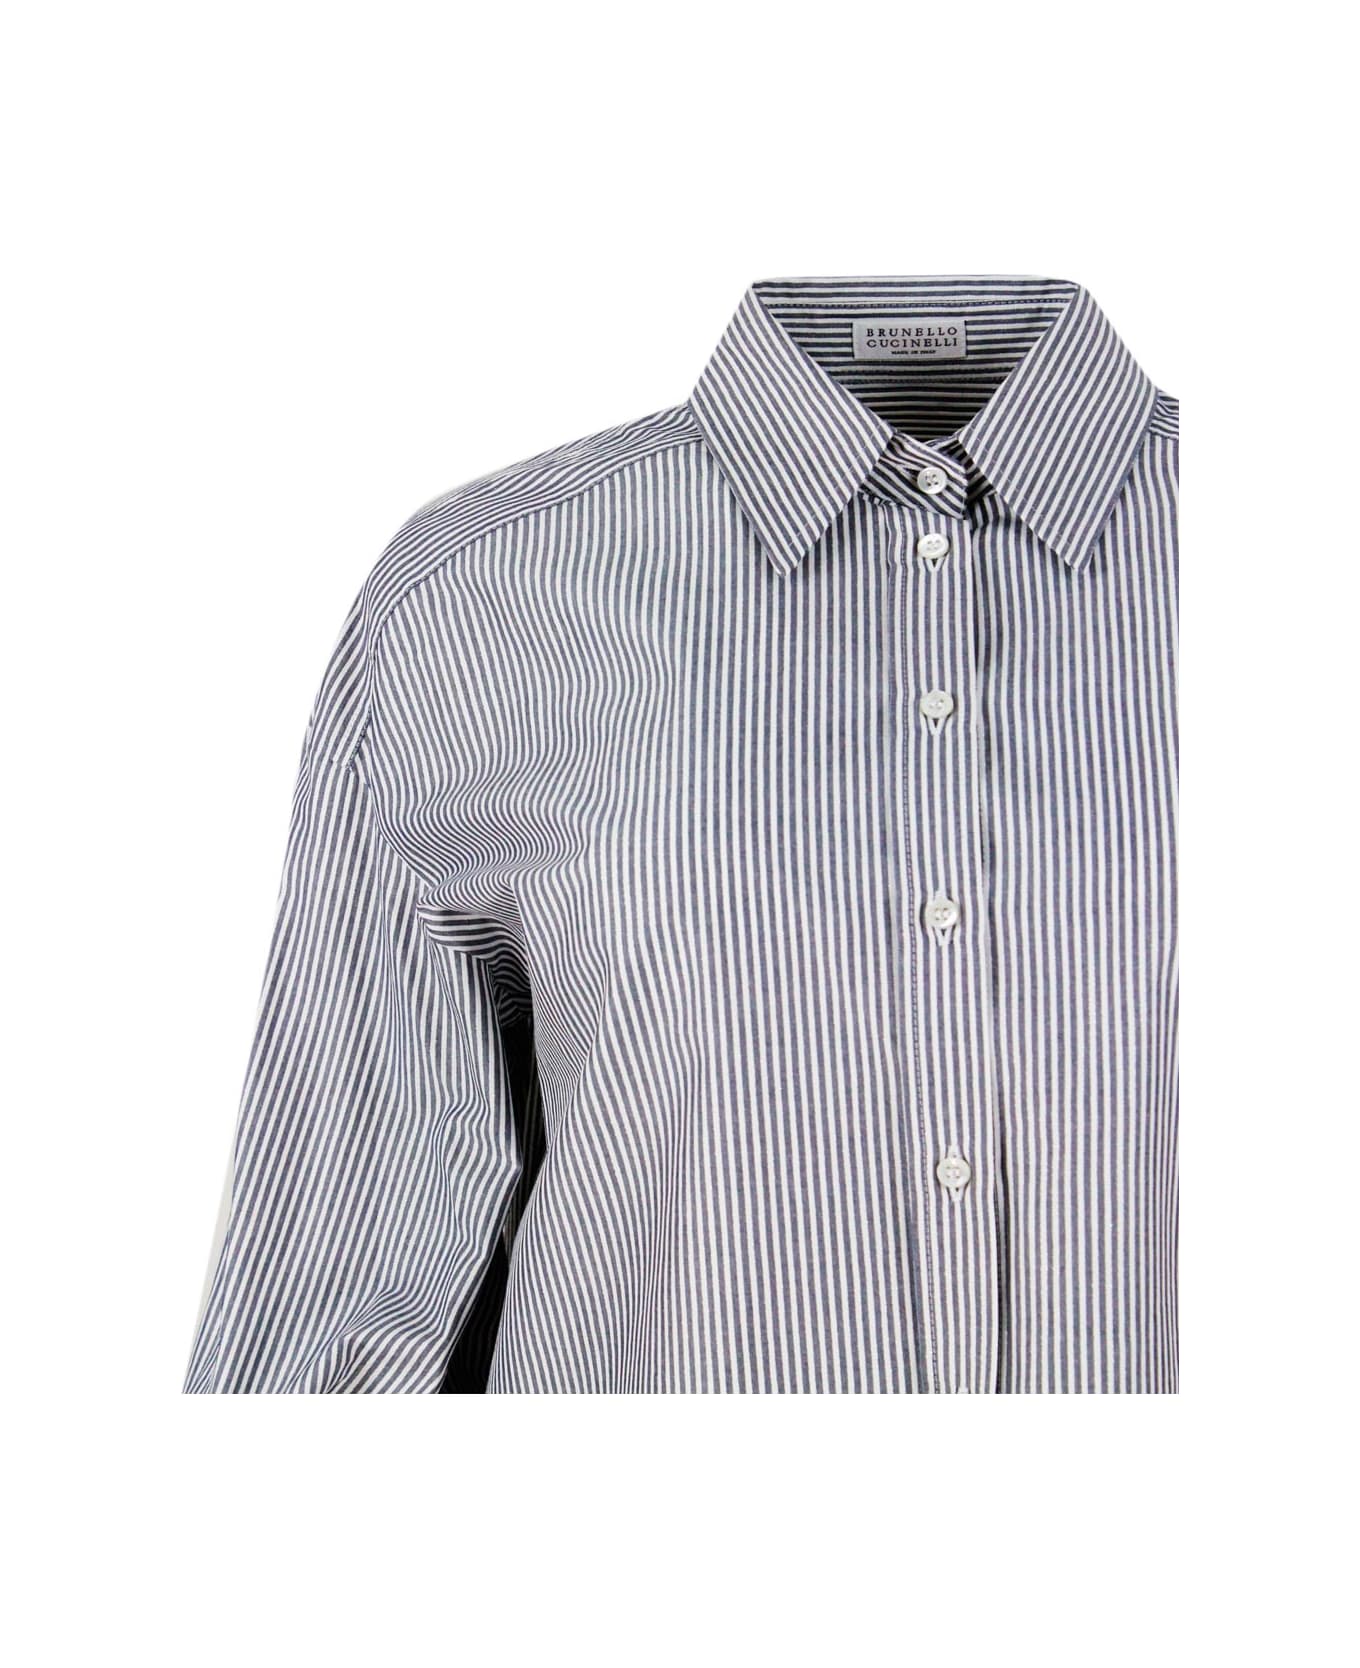 Brunello Cucinelli Long-sleeved Shirt Made Of Cotton With A Striped Pattern Embellished With Bright Lurex Threads - Blu